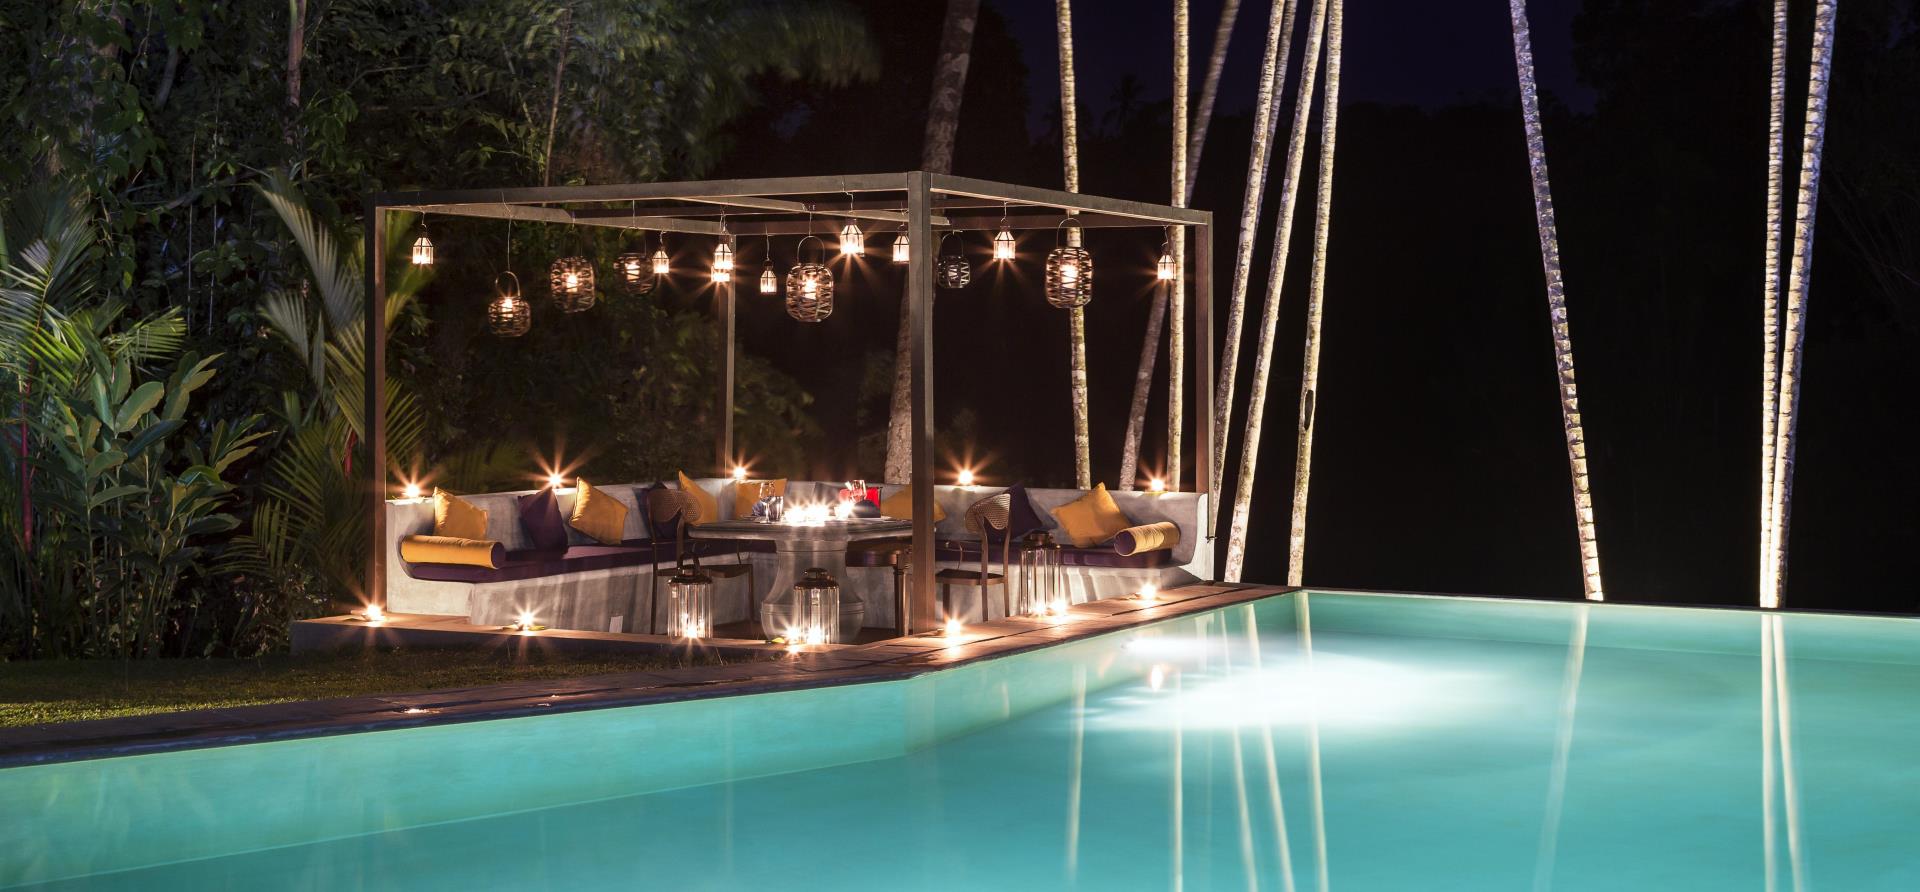 Dine by the pool - The Kandy House